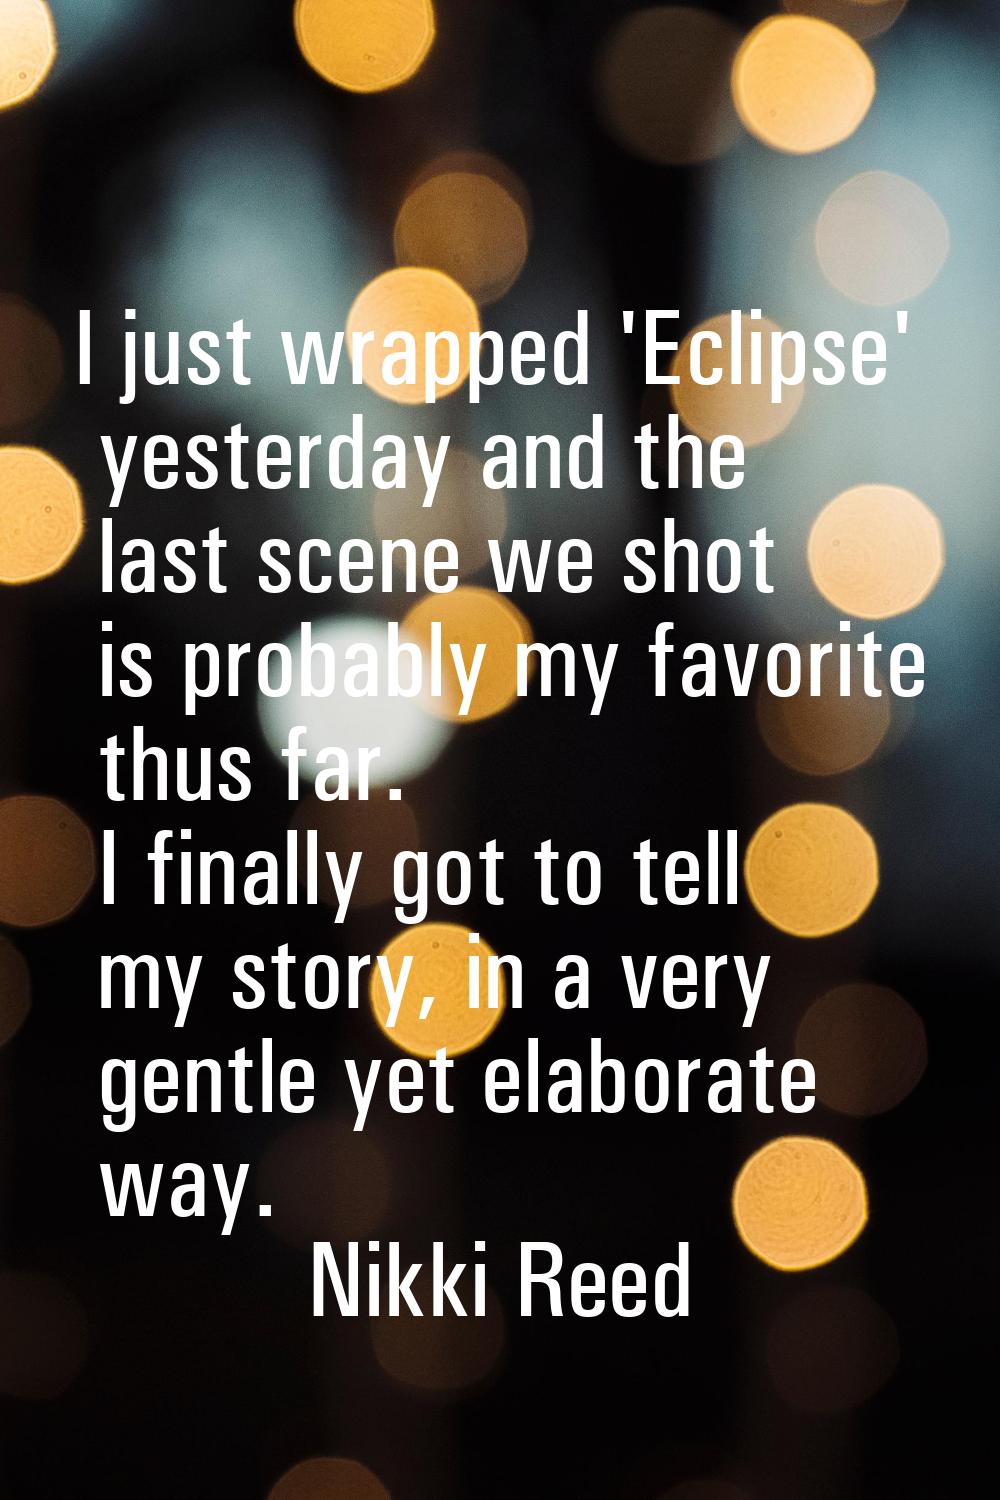 I just wrapped 'Eclipse' yesterday and the last scene we shot is probably my favorite thus far. I f